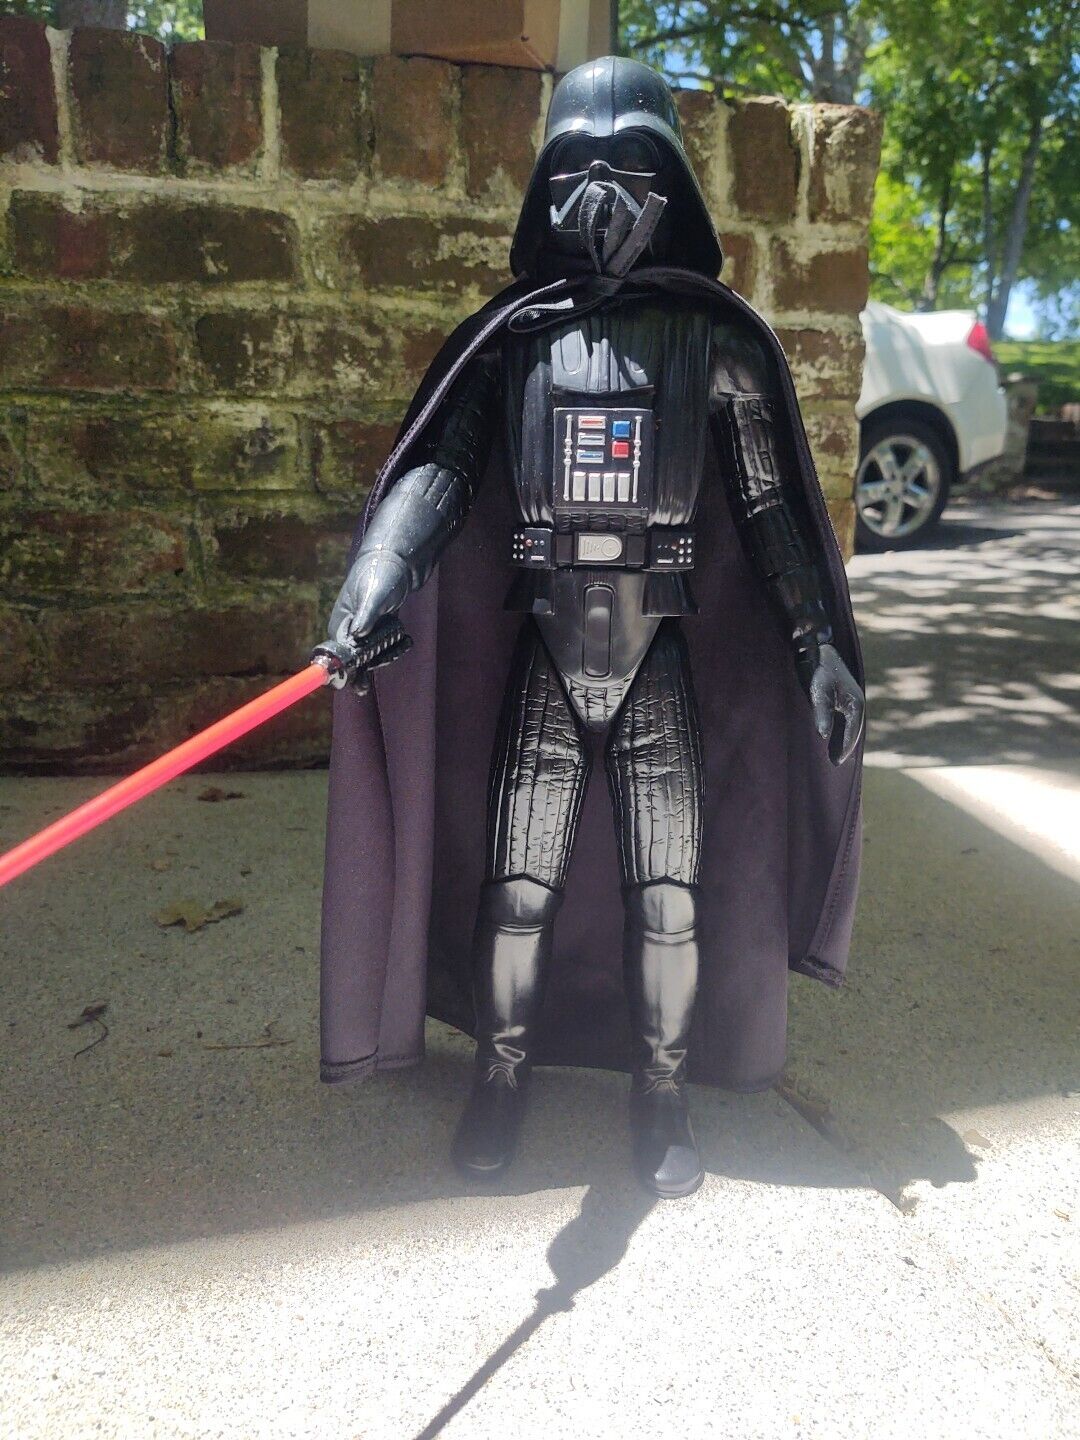 Vintage Darth Vader Item No. 38610 By Kenner 1977 15inch Posable Action...